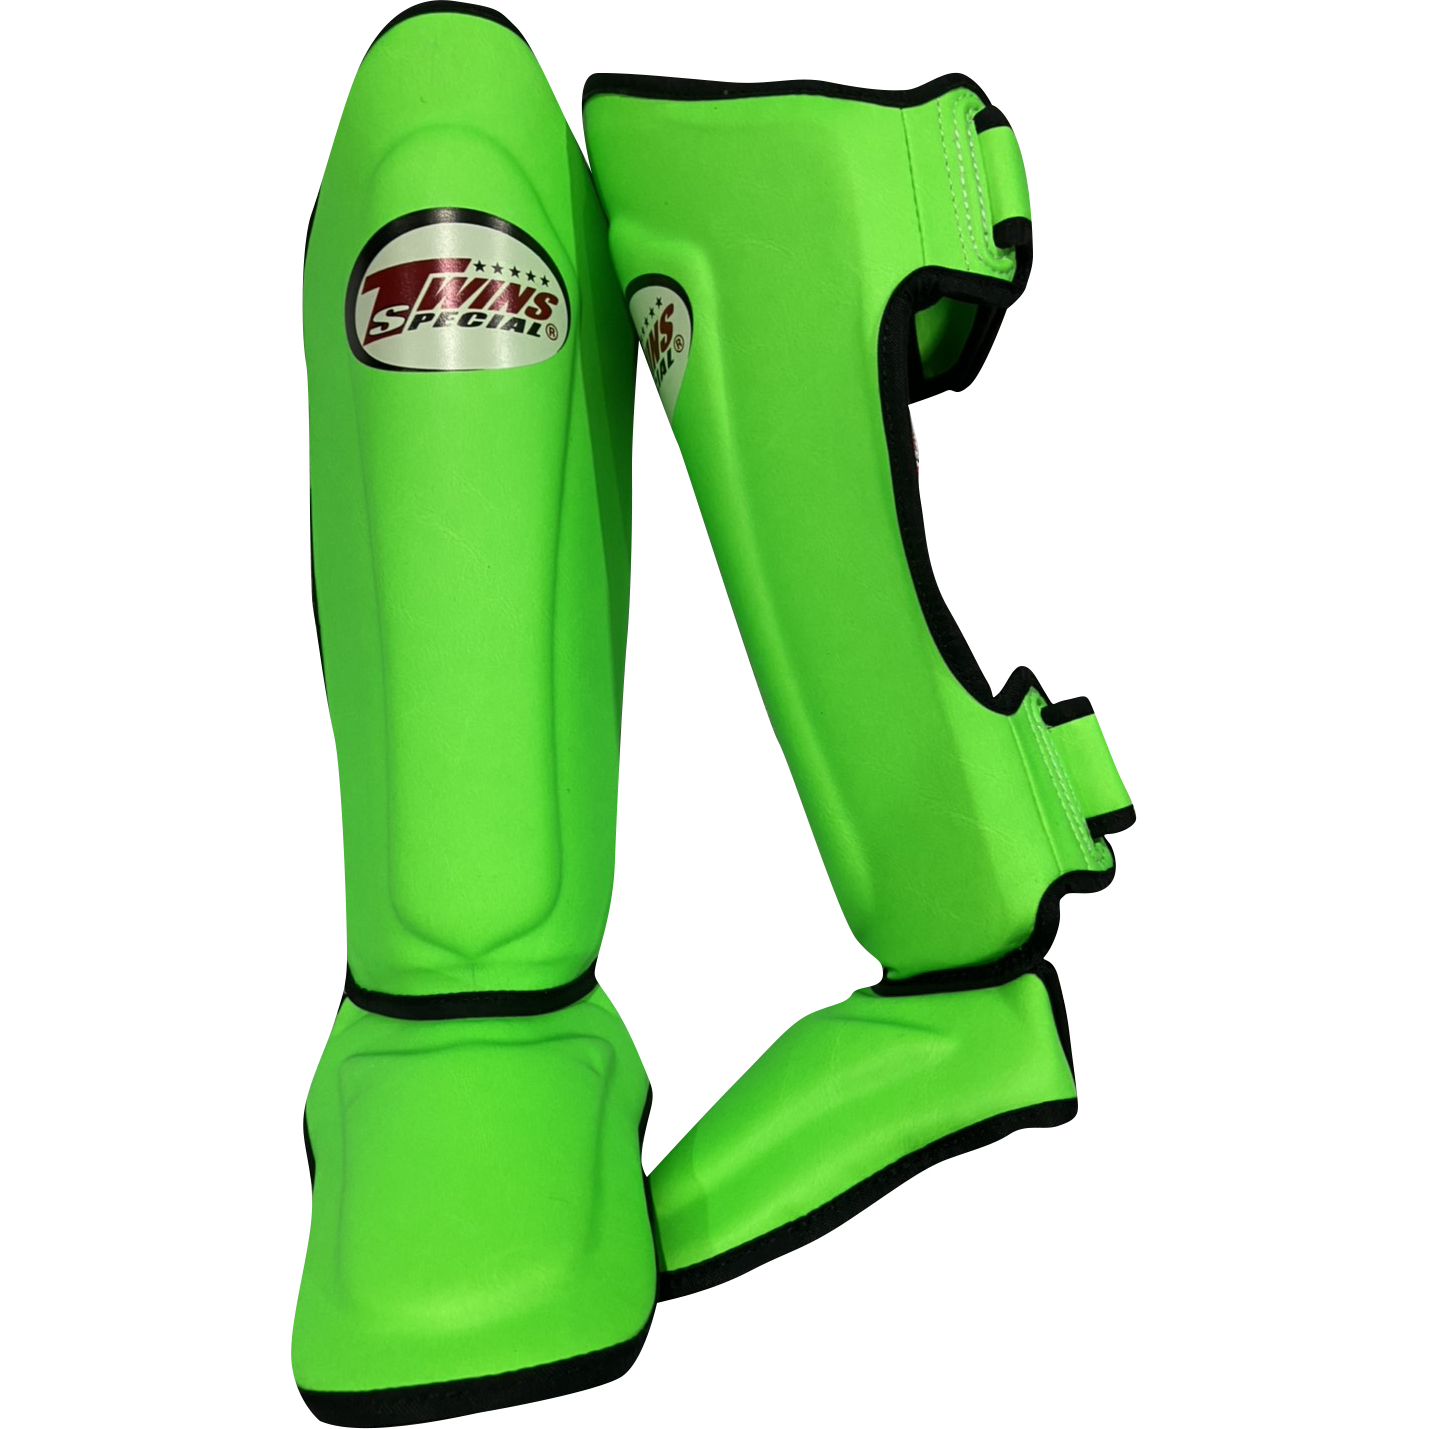 Twins Special Shin Guards Green SGS10